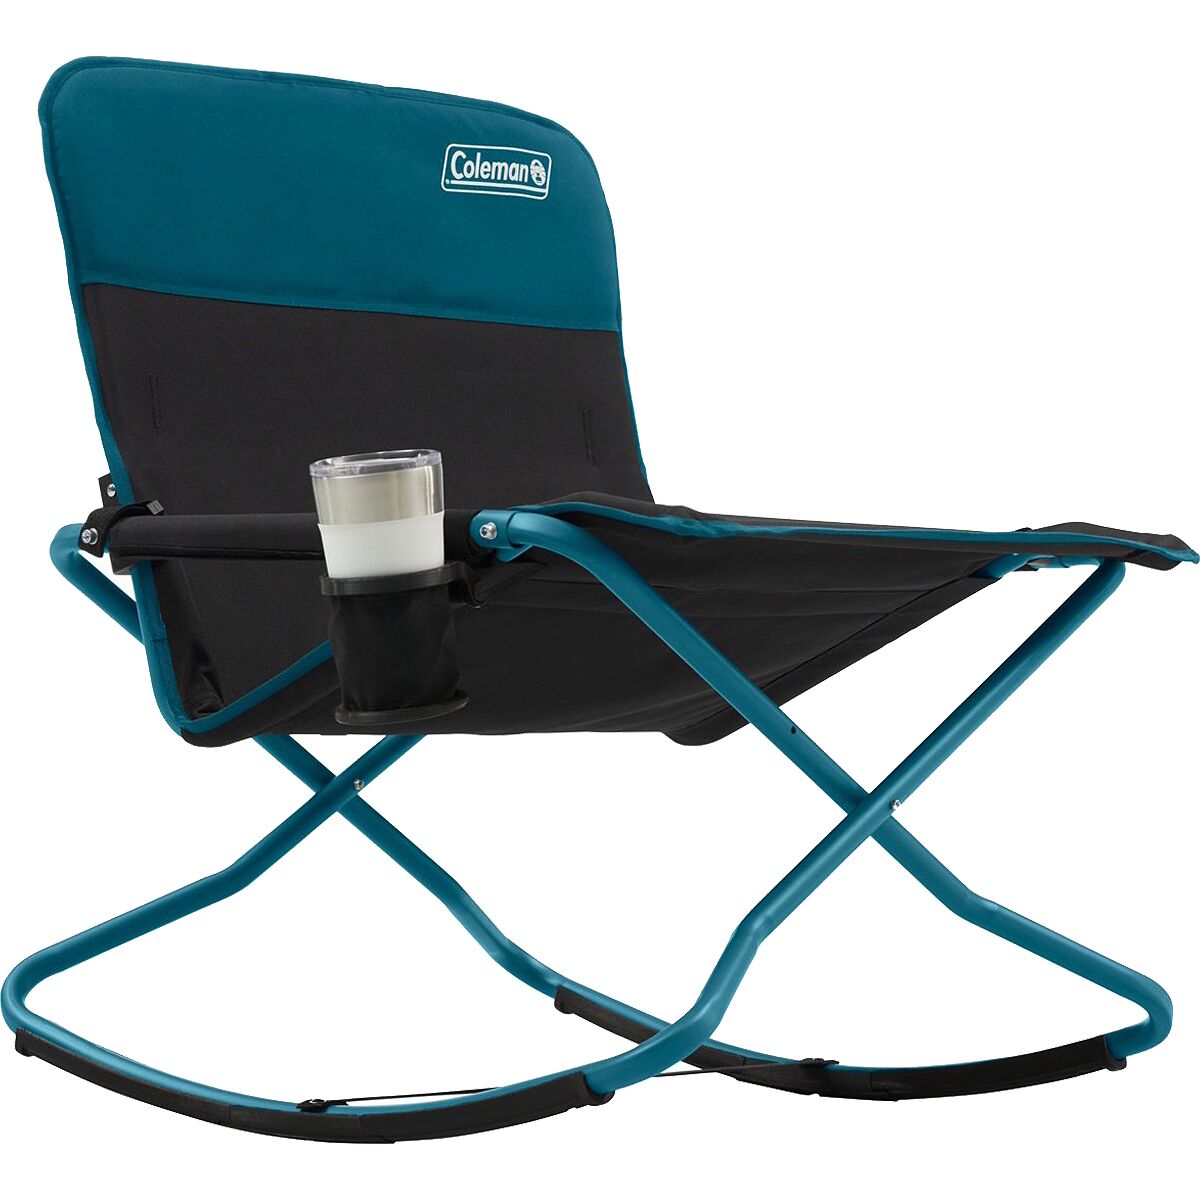 Ready Rocker review: A portable rocking chair alternative - Reviewed